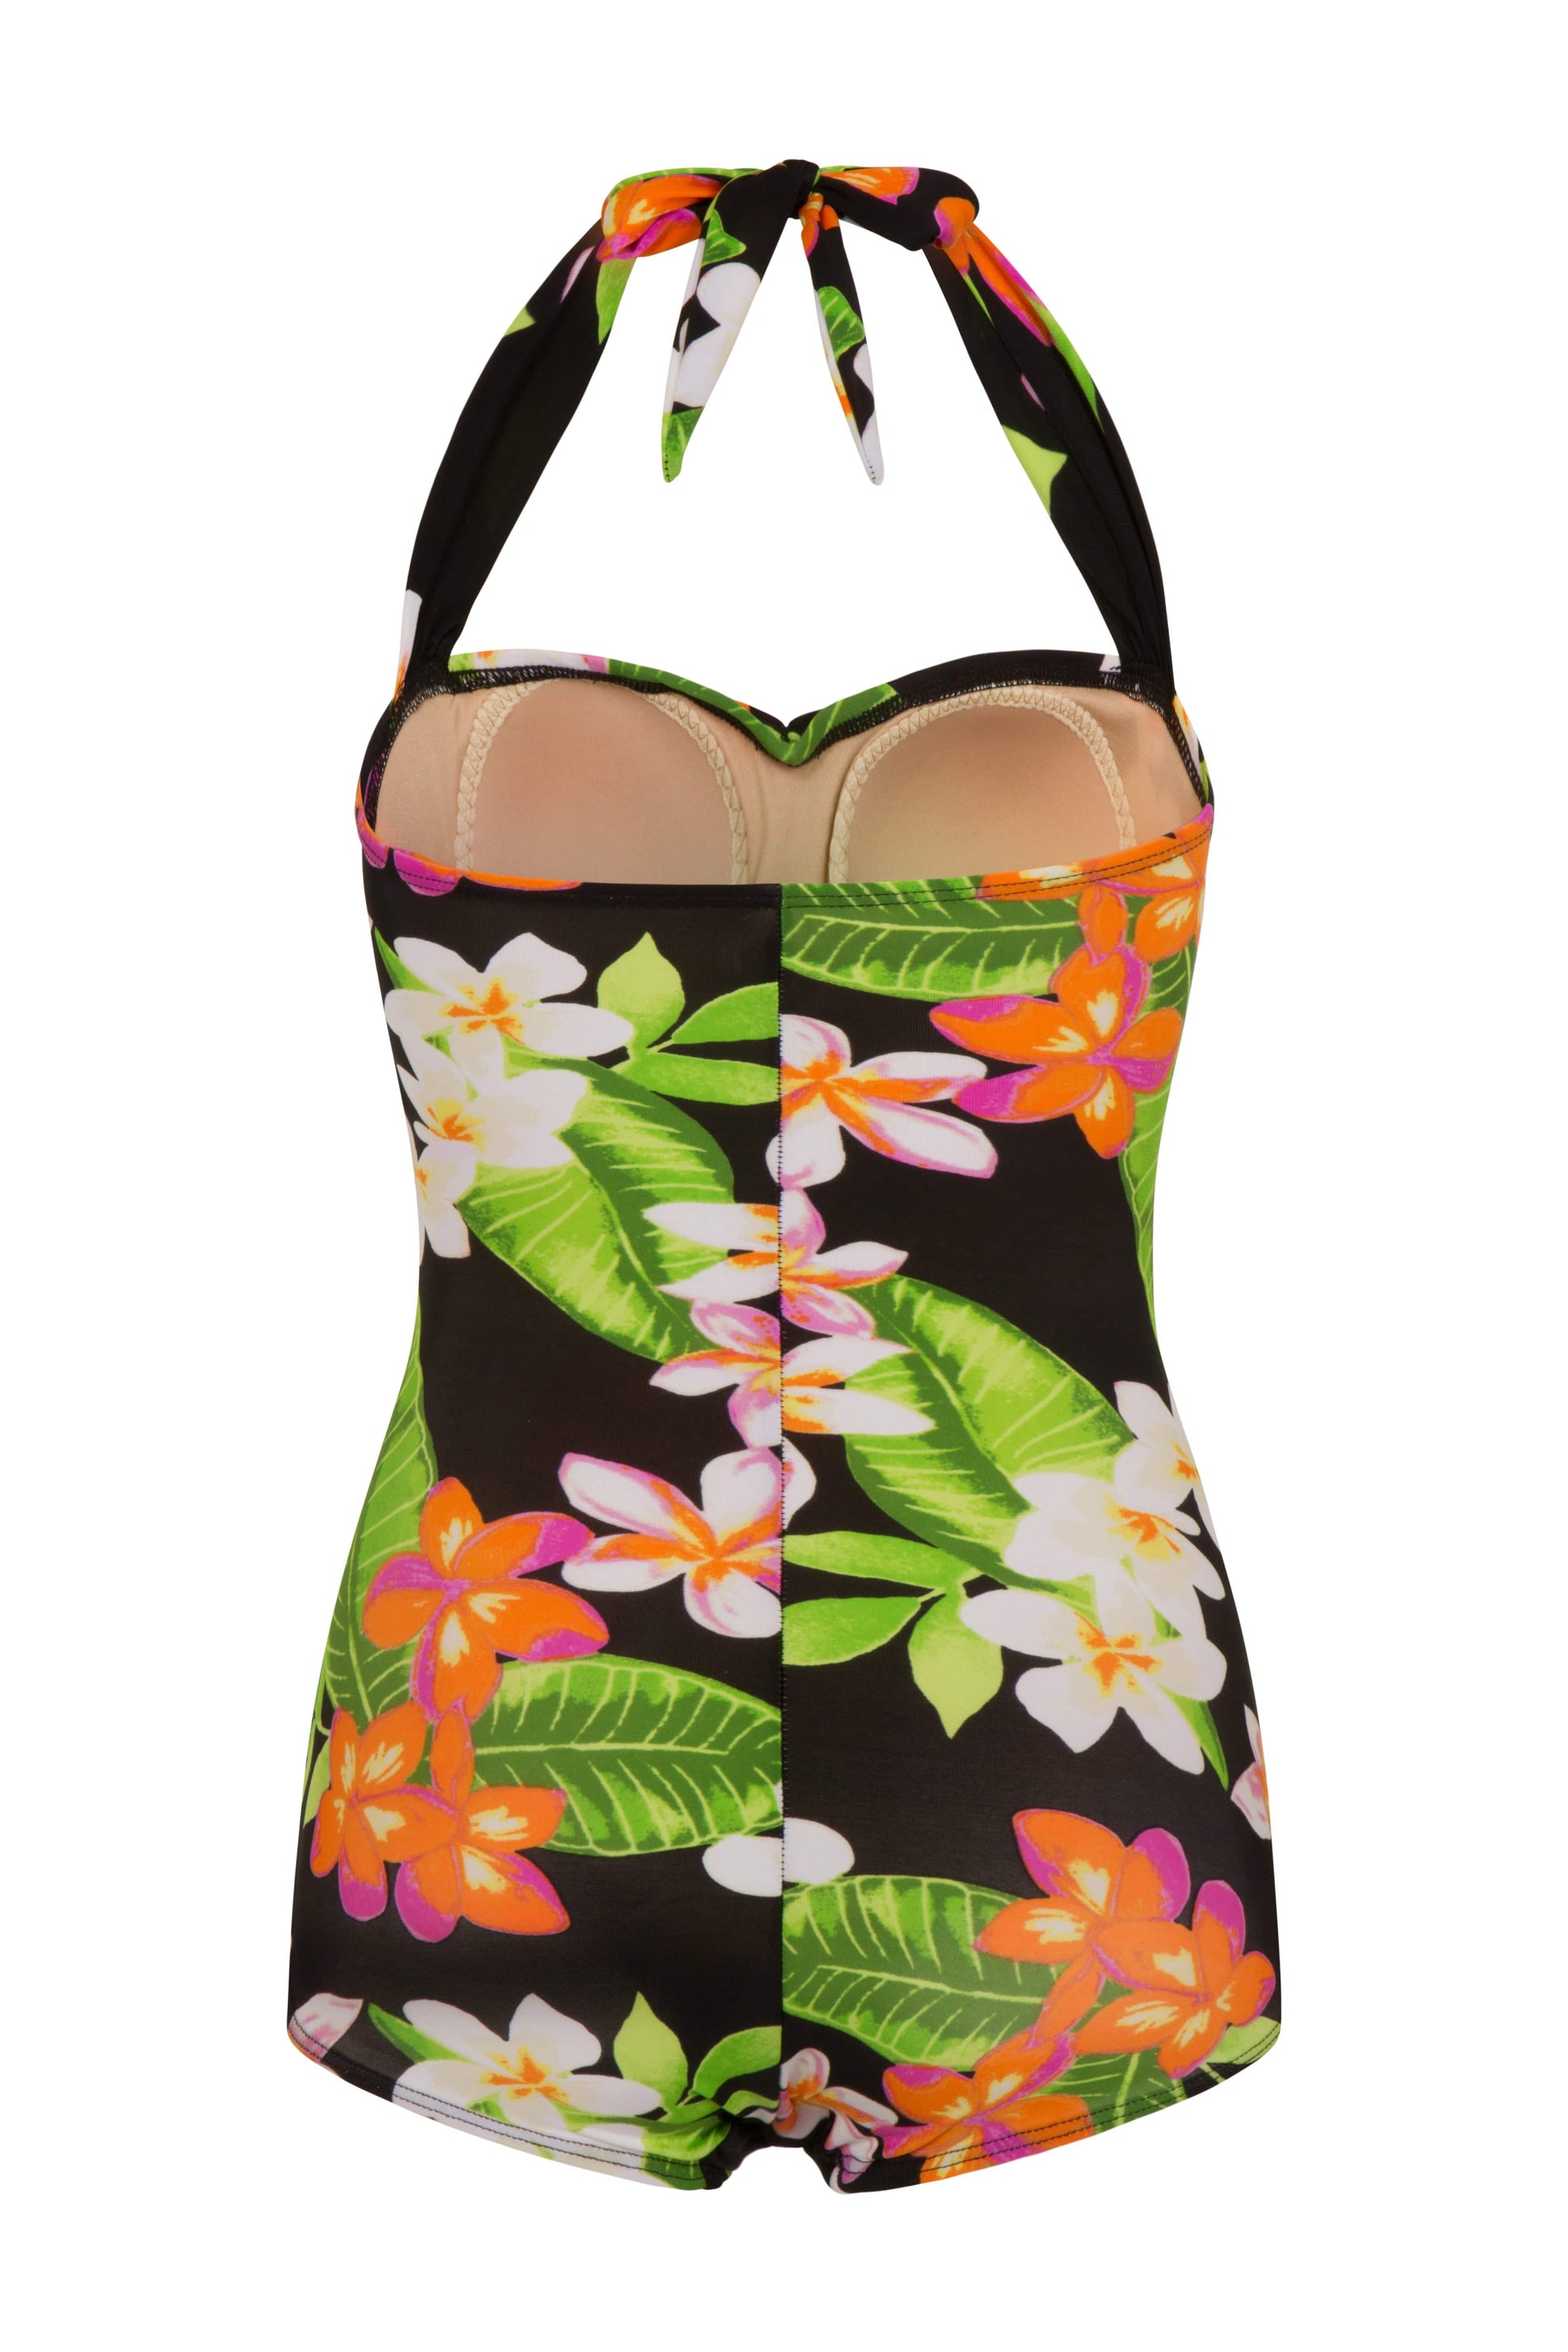 BettyliciousUK Esther Williams Tropical Flower Print Vintage Swimsuit with Tummy Control